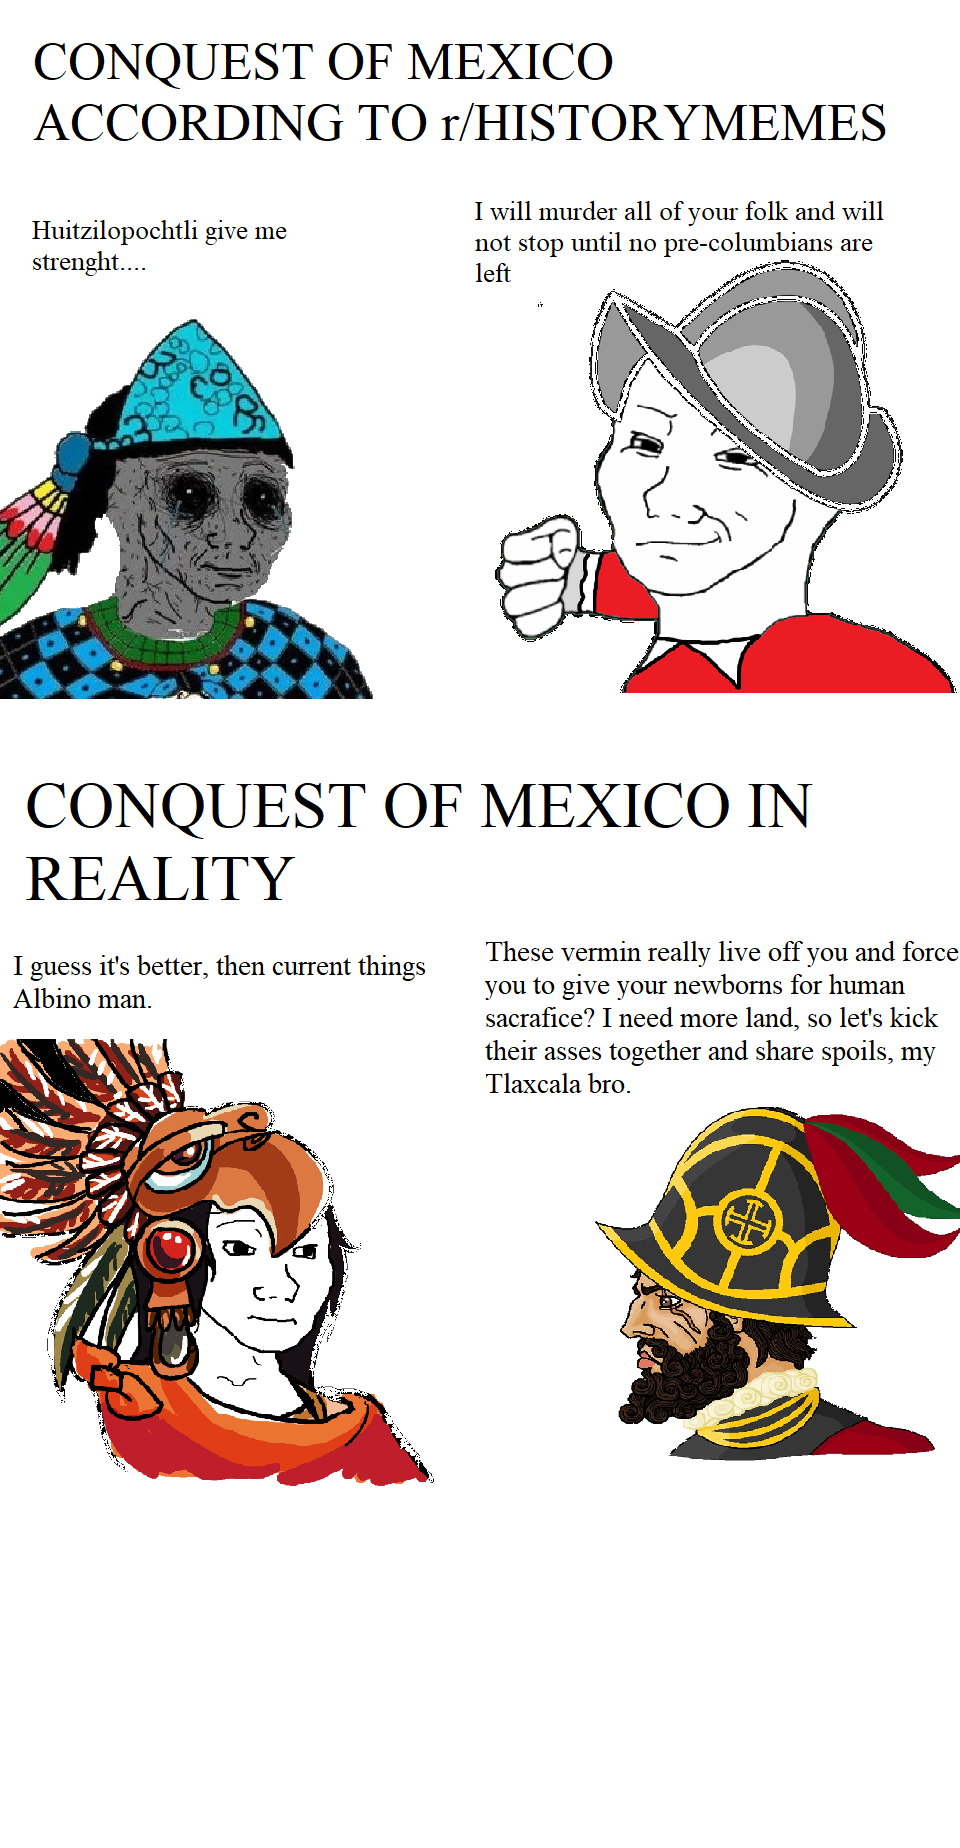 1,5k Spaniards wouldn't conquer an empire without help of 200k+ natives.